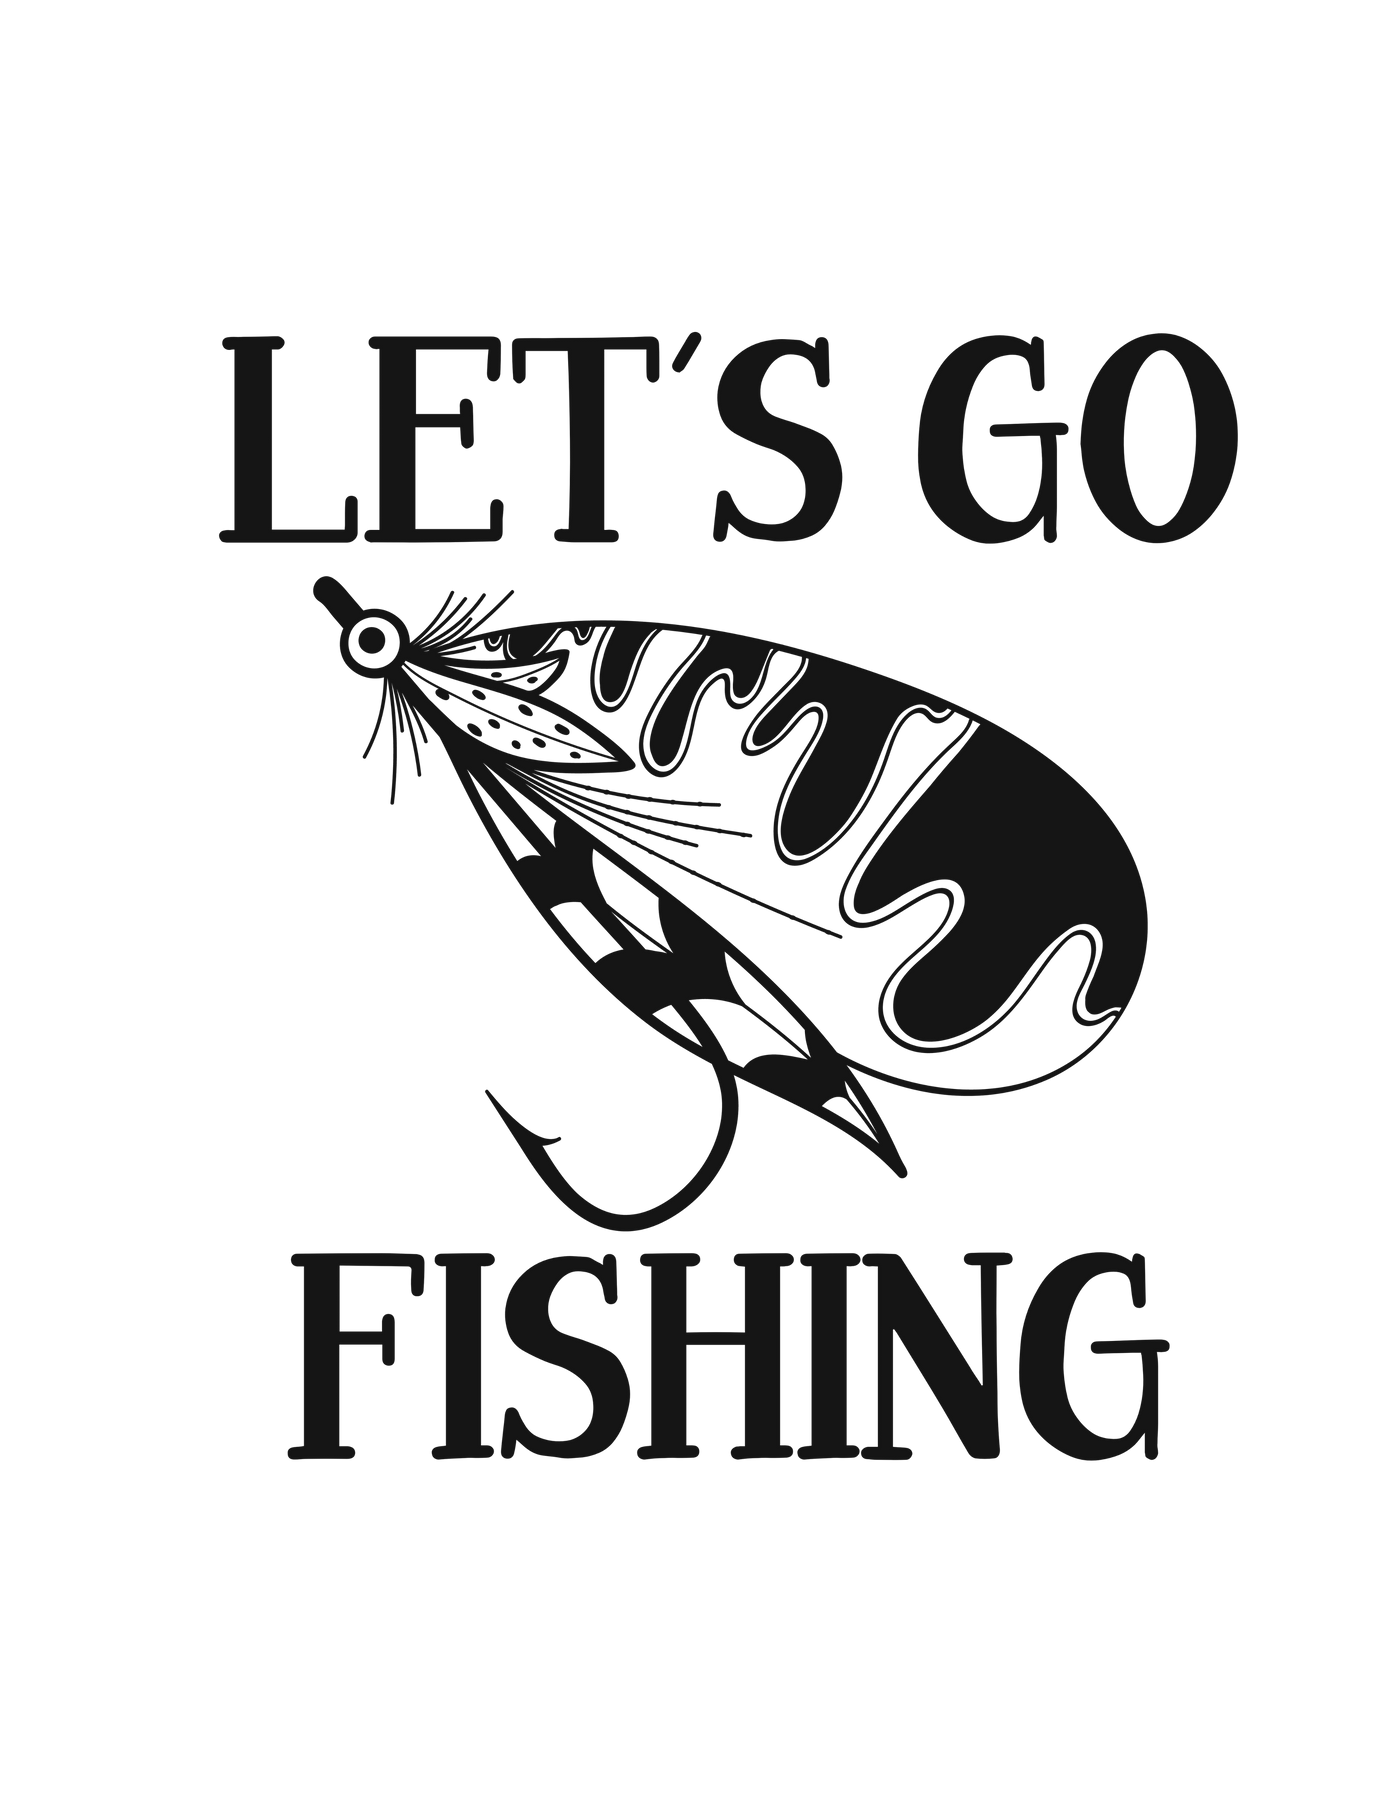 Let's Go Fly Fishing Unisex Tee